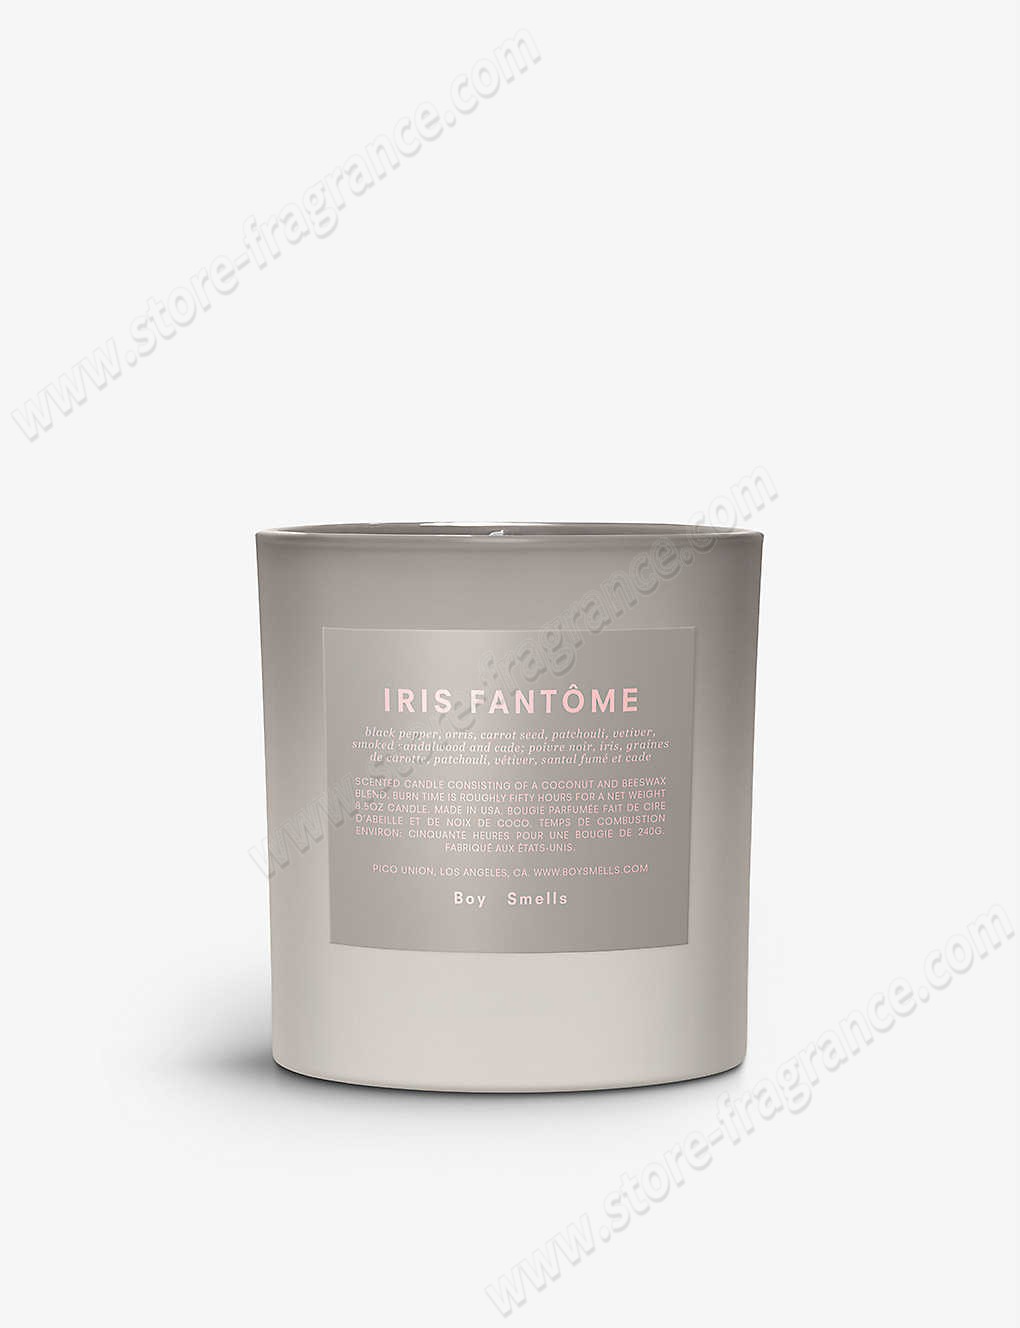 BOY SMELLS/Iris Fantome scented candle 240g ✿ Discount Store - BOY SMELLS/Iris Fantome scented candle 240g ✿ Discount Store